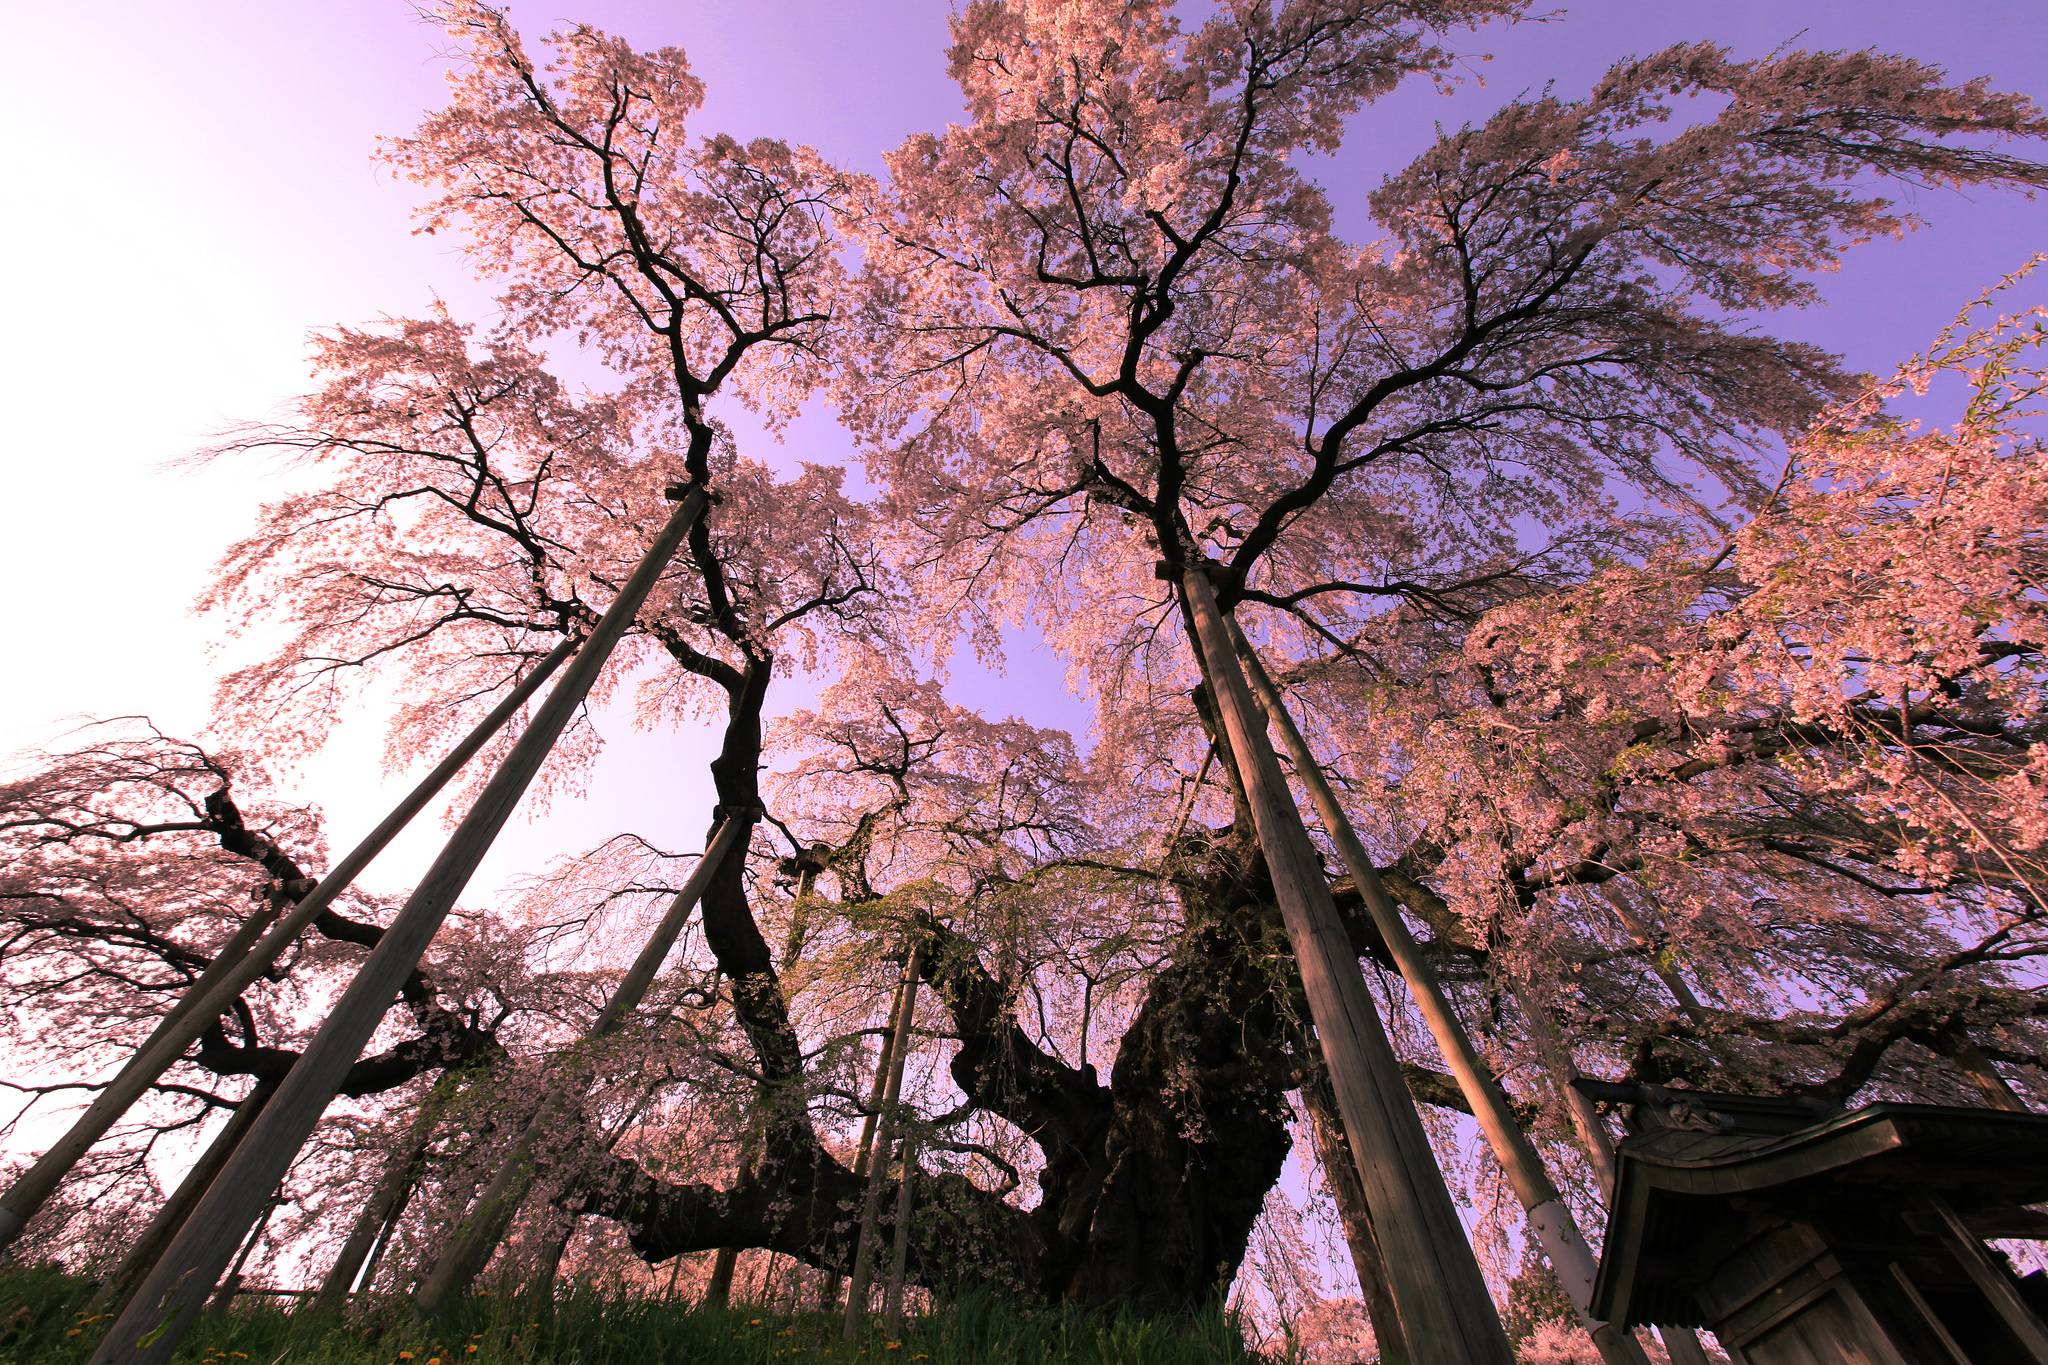 Under a 1000 year old weeping cherry blossom tree in Japan - Imgur